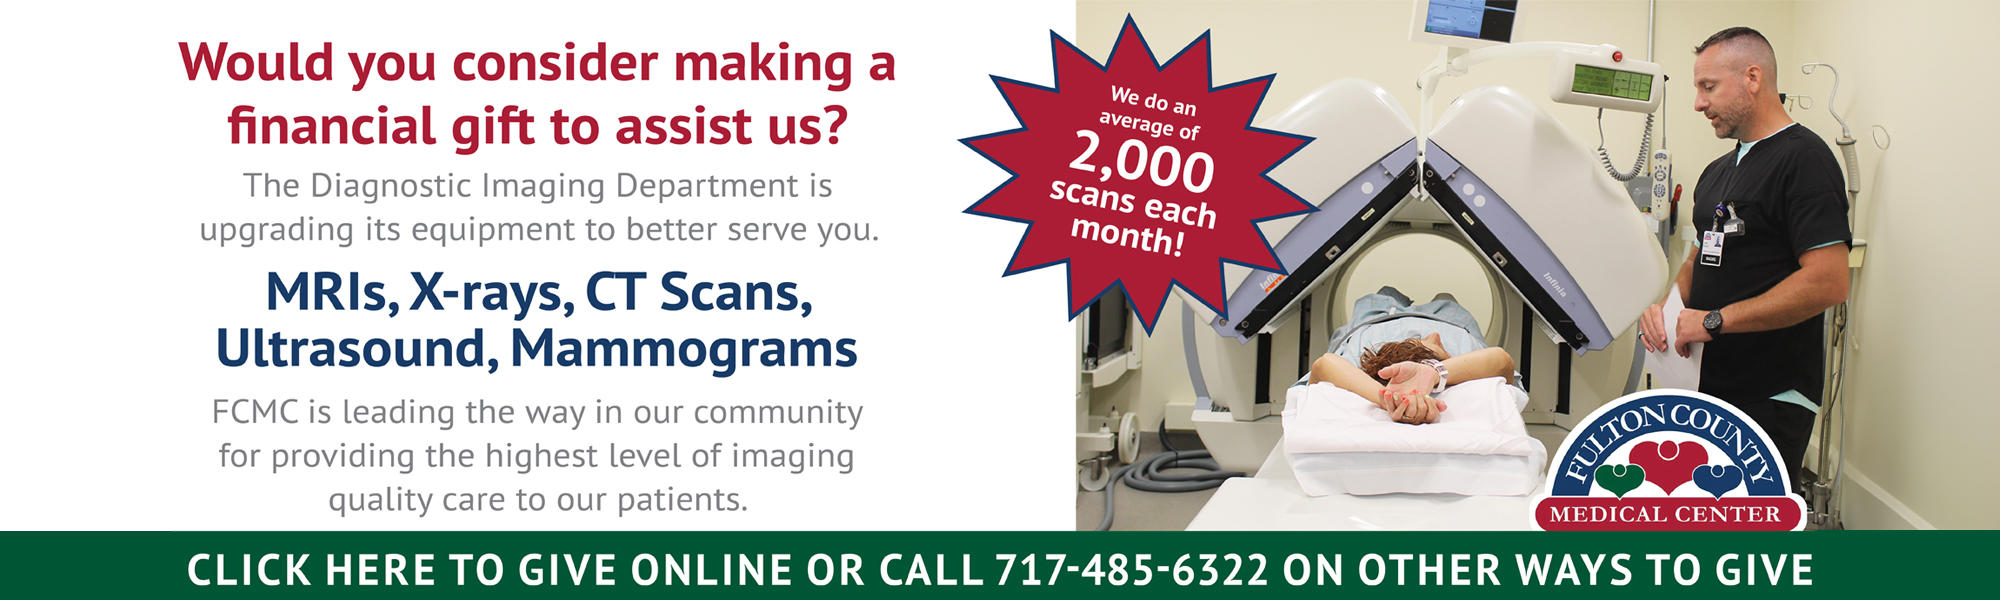 Would you consider making a financial gift to assist us? The Diagnostic Imaging Department is upgrading it's equipment to better serve you. MRI's , X-Rays, CT Scans, Ultrasound, Mammograms. FCMC is leading the way in our community for providing the highest level of imaging quality care to our patients. Click here to give online or call 717-485-6322 on other ways to give.